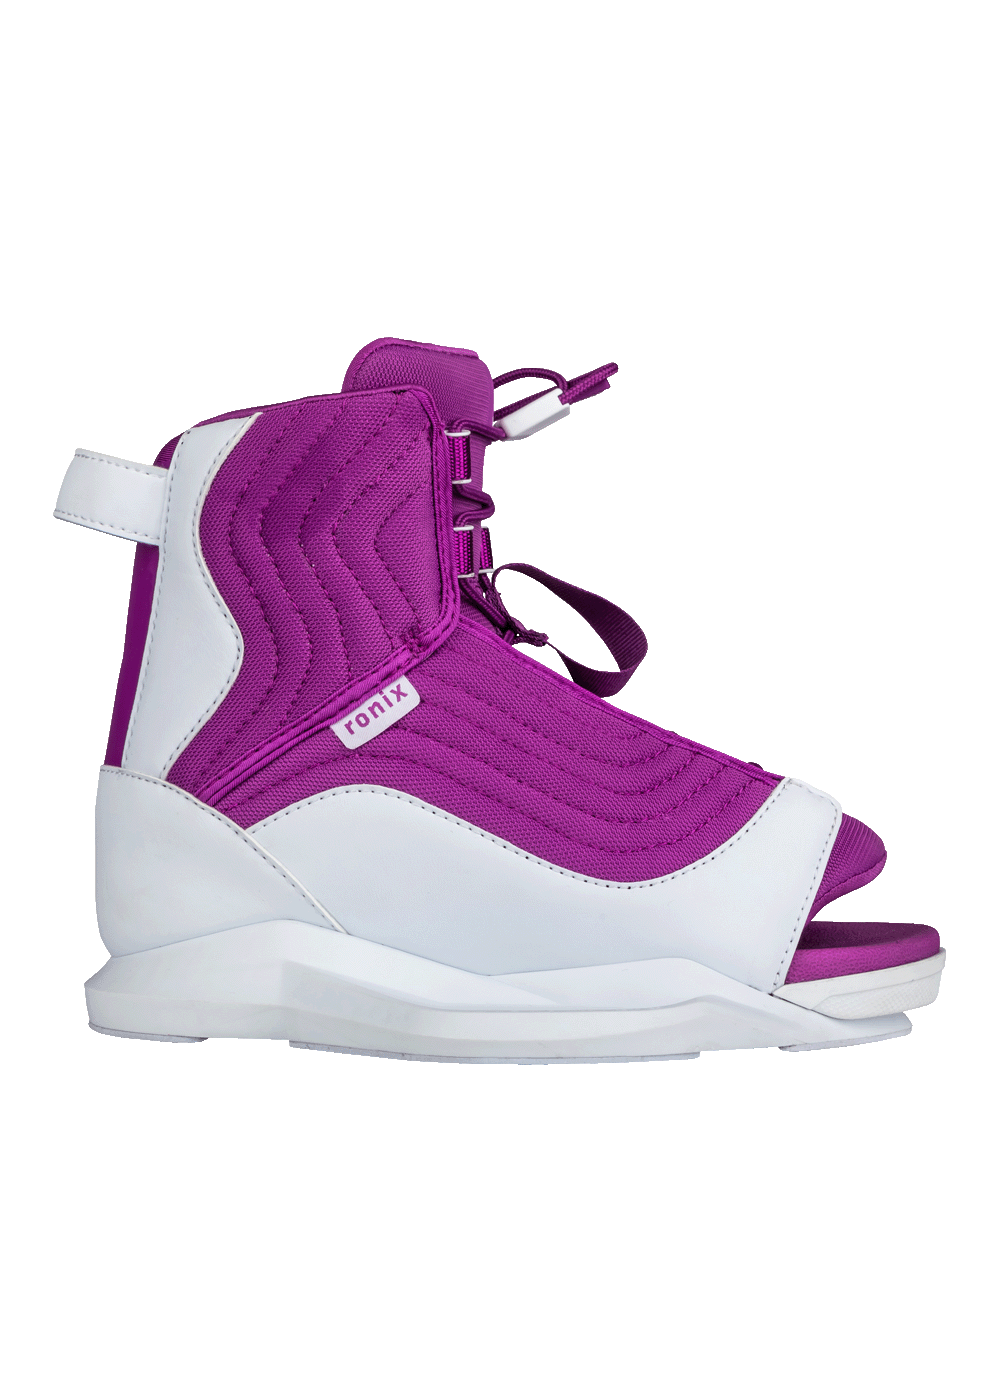 RONIX AUGUST | GIRL'S BOOTS